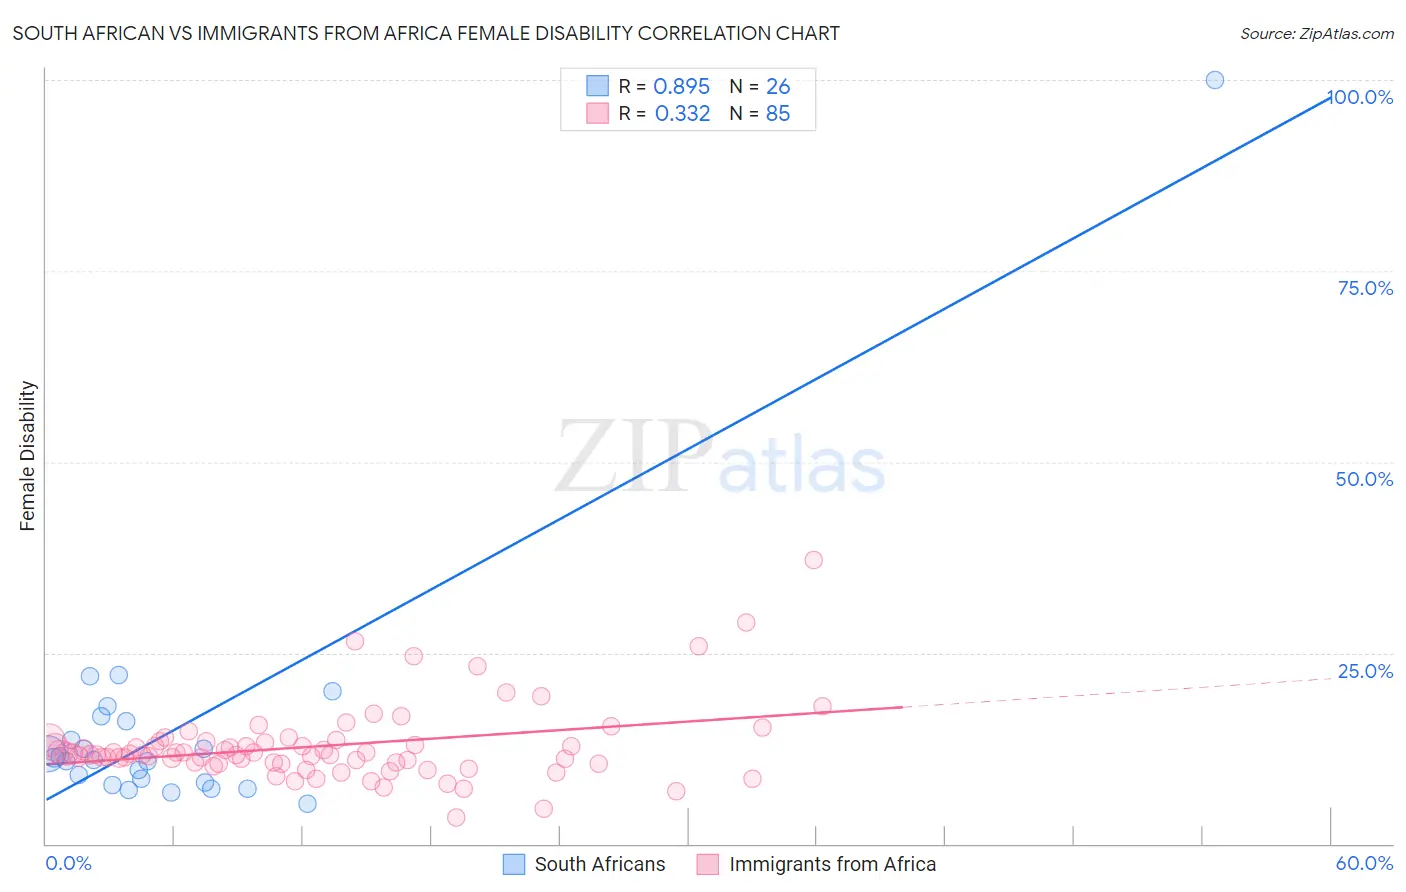 South African vs Immigrants from Africa Female Disability